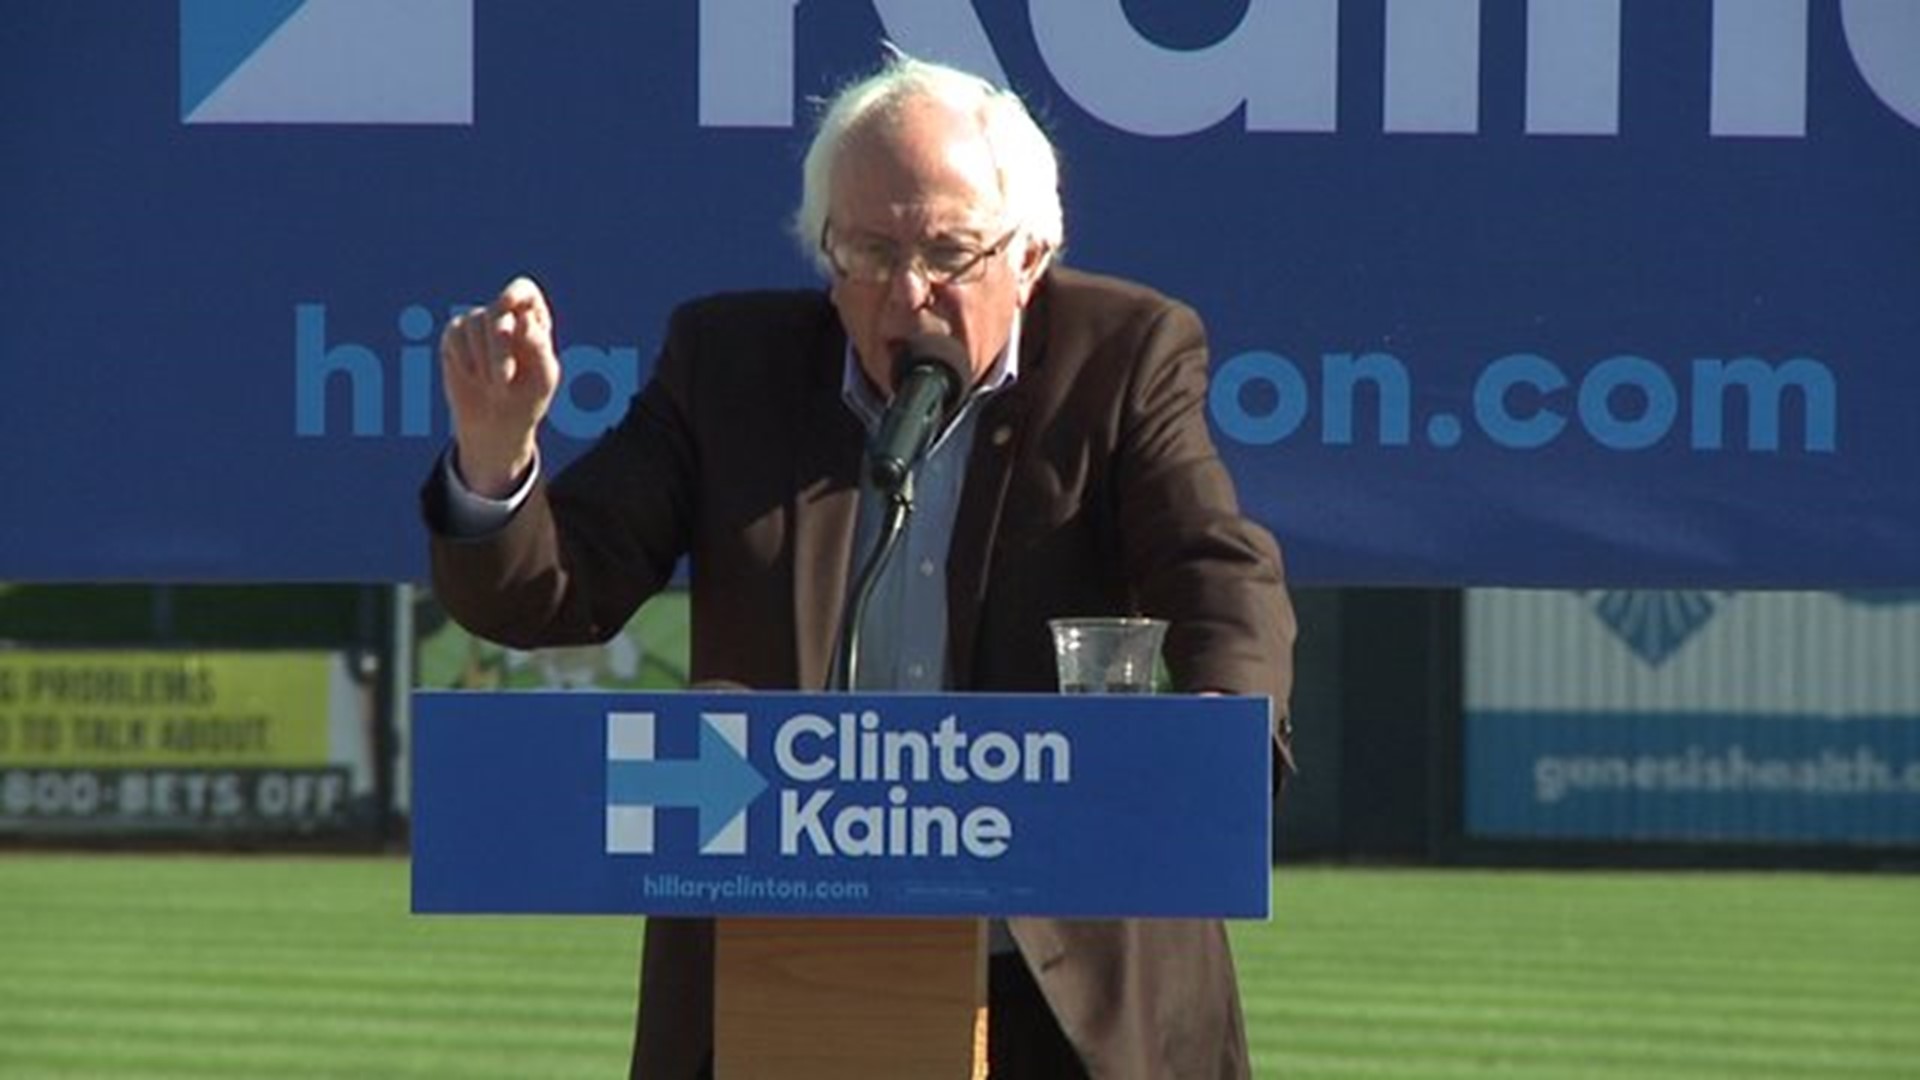 Bernie Sanders asks supporters to rally behind Clinton